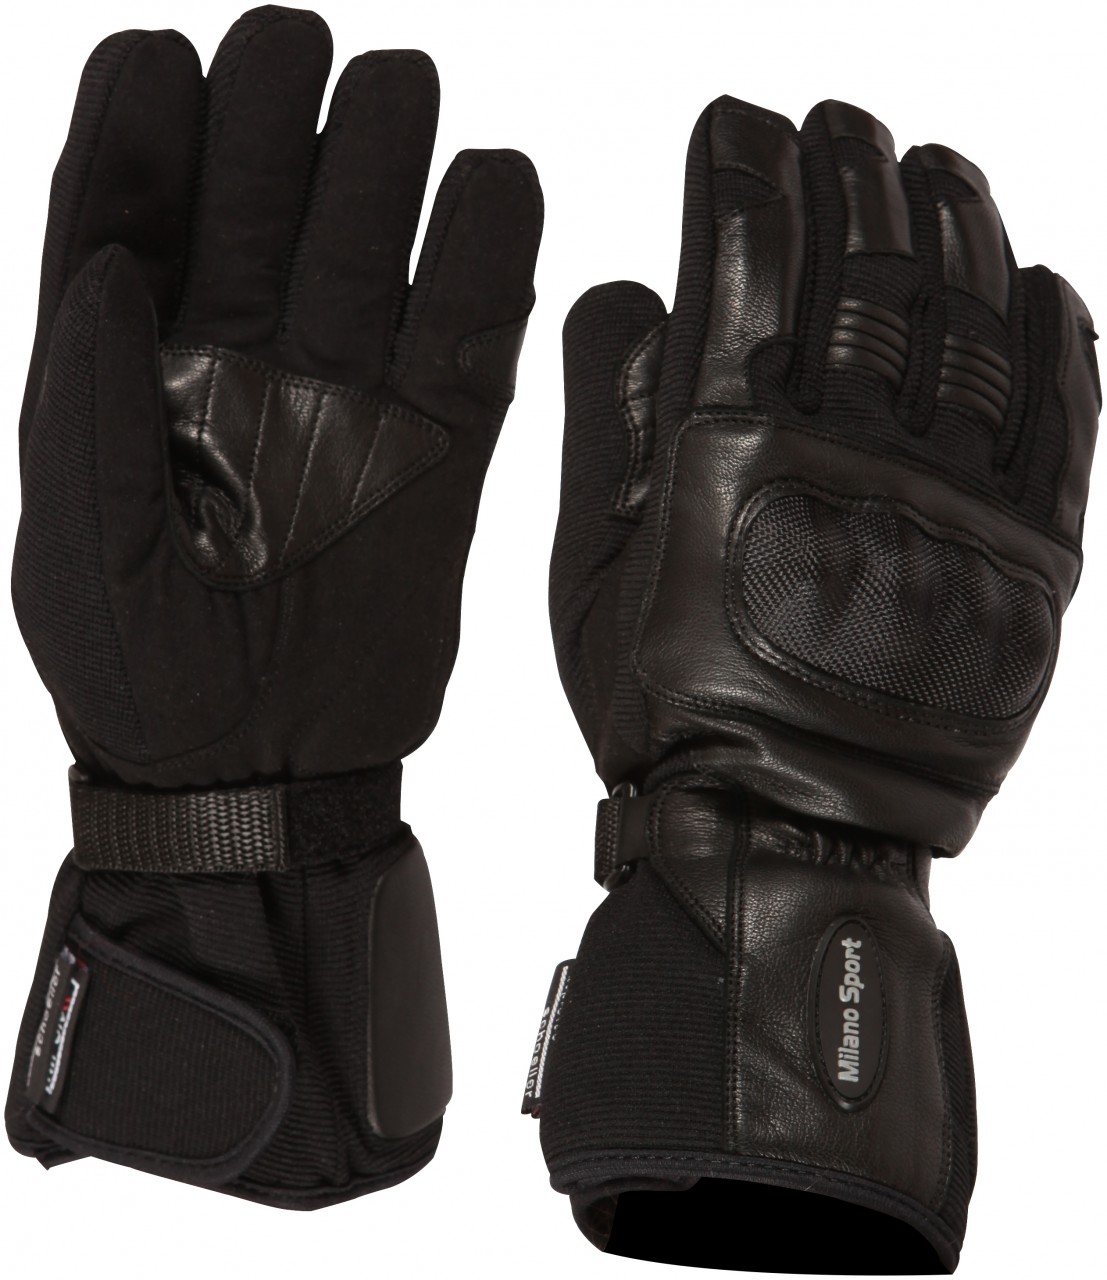 Buffalo Shadow Leather Textile Mix Motorcycle Motorbike Scooter WP Gloves Black 